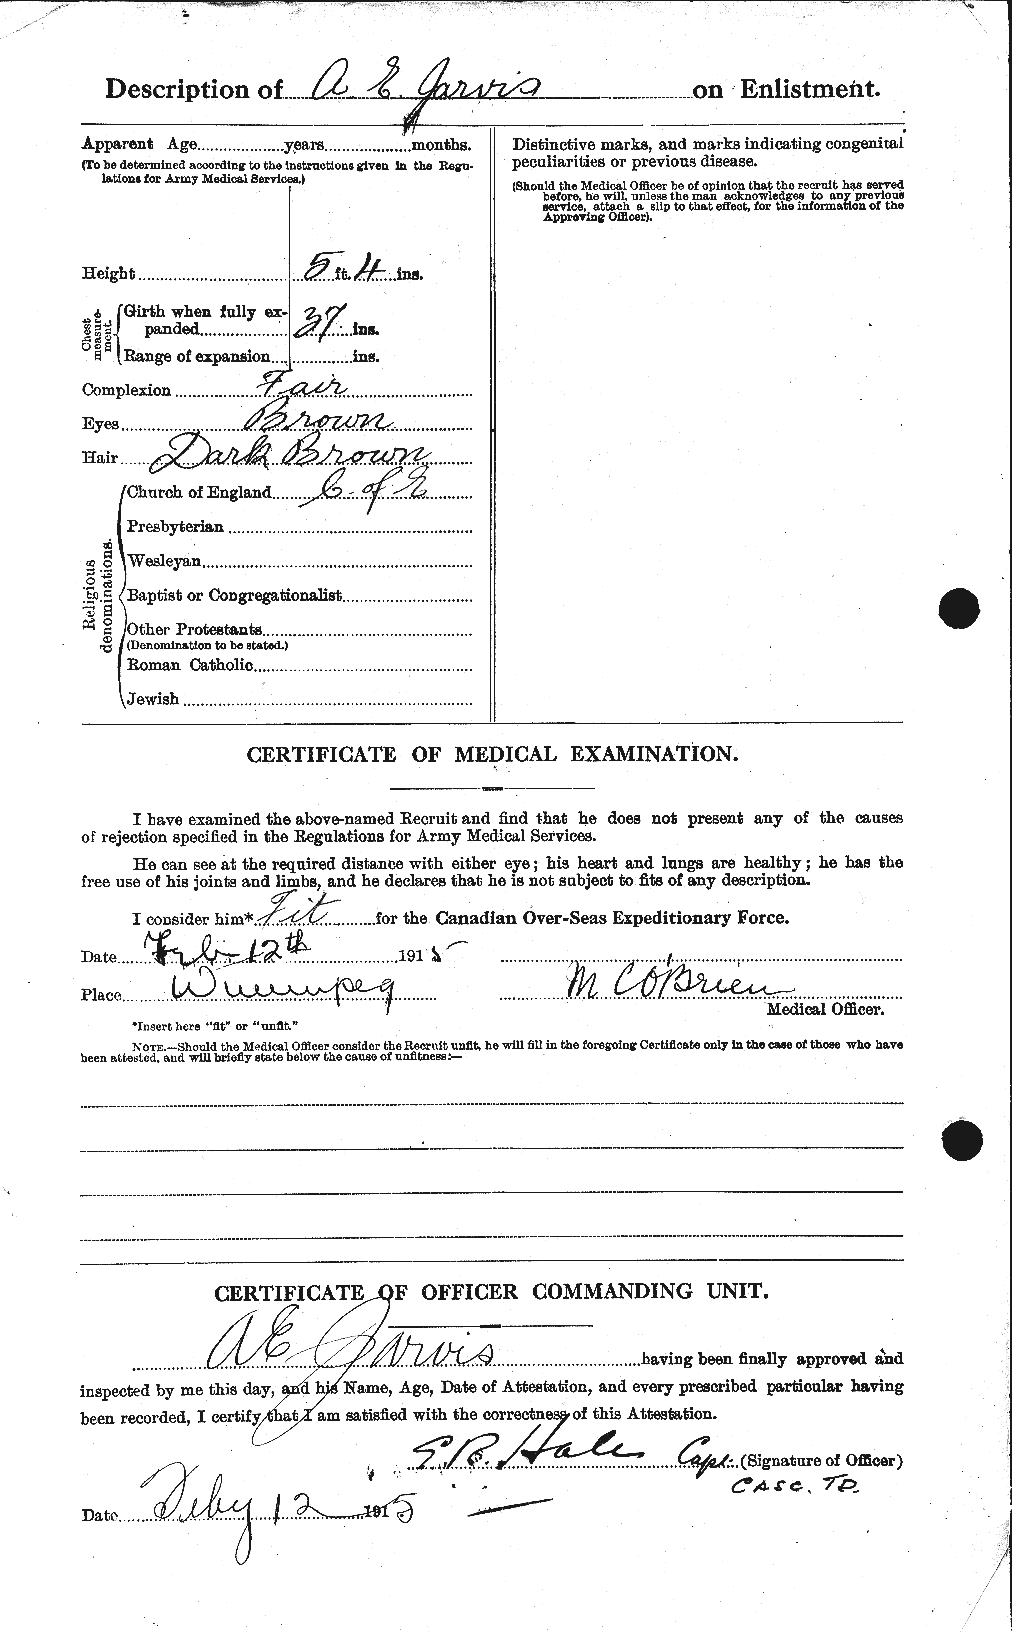 Personnel Records of the First World War - CEF 414631b